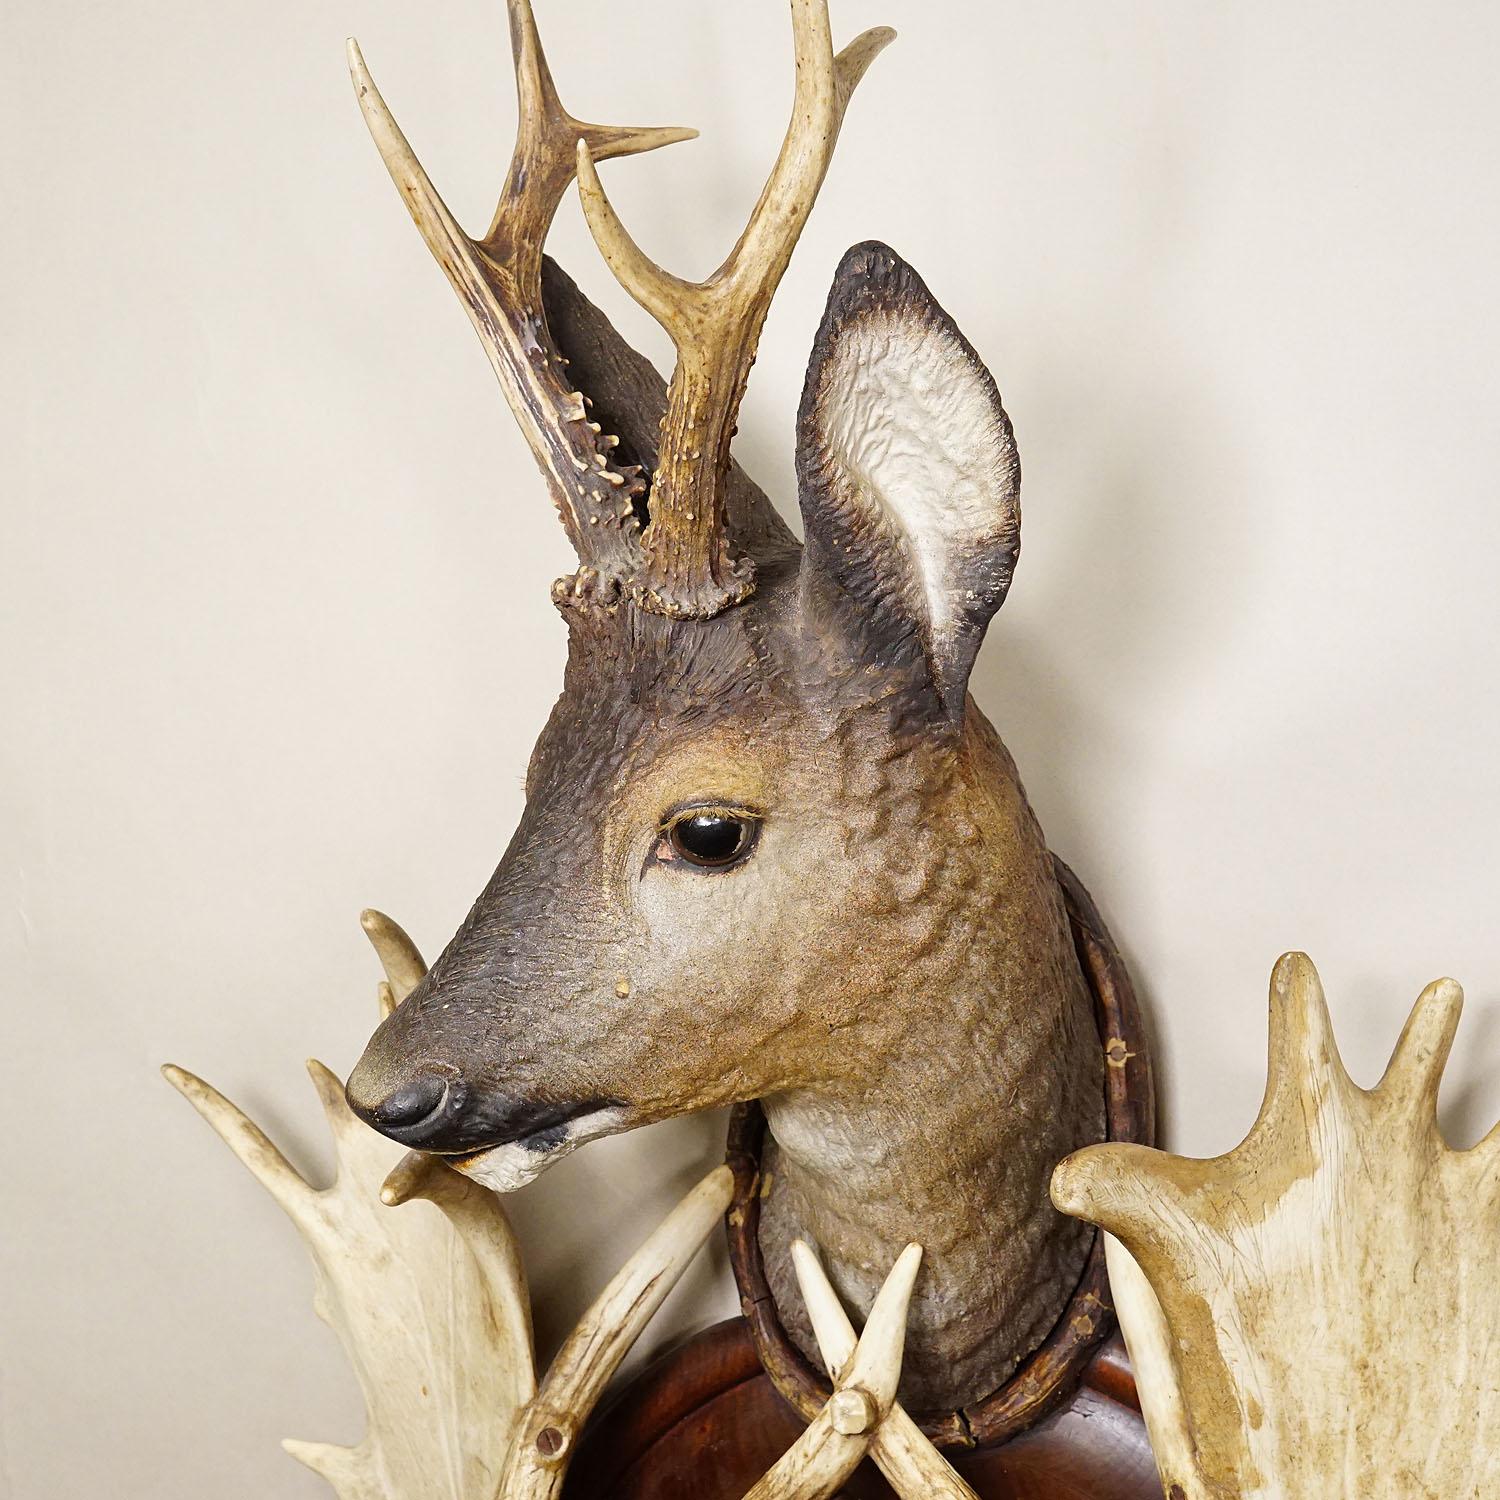 Antique Cabin Antler Wall Clock with Deer Head Austria ca. 1900 For Sale 2